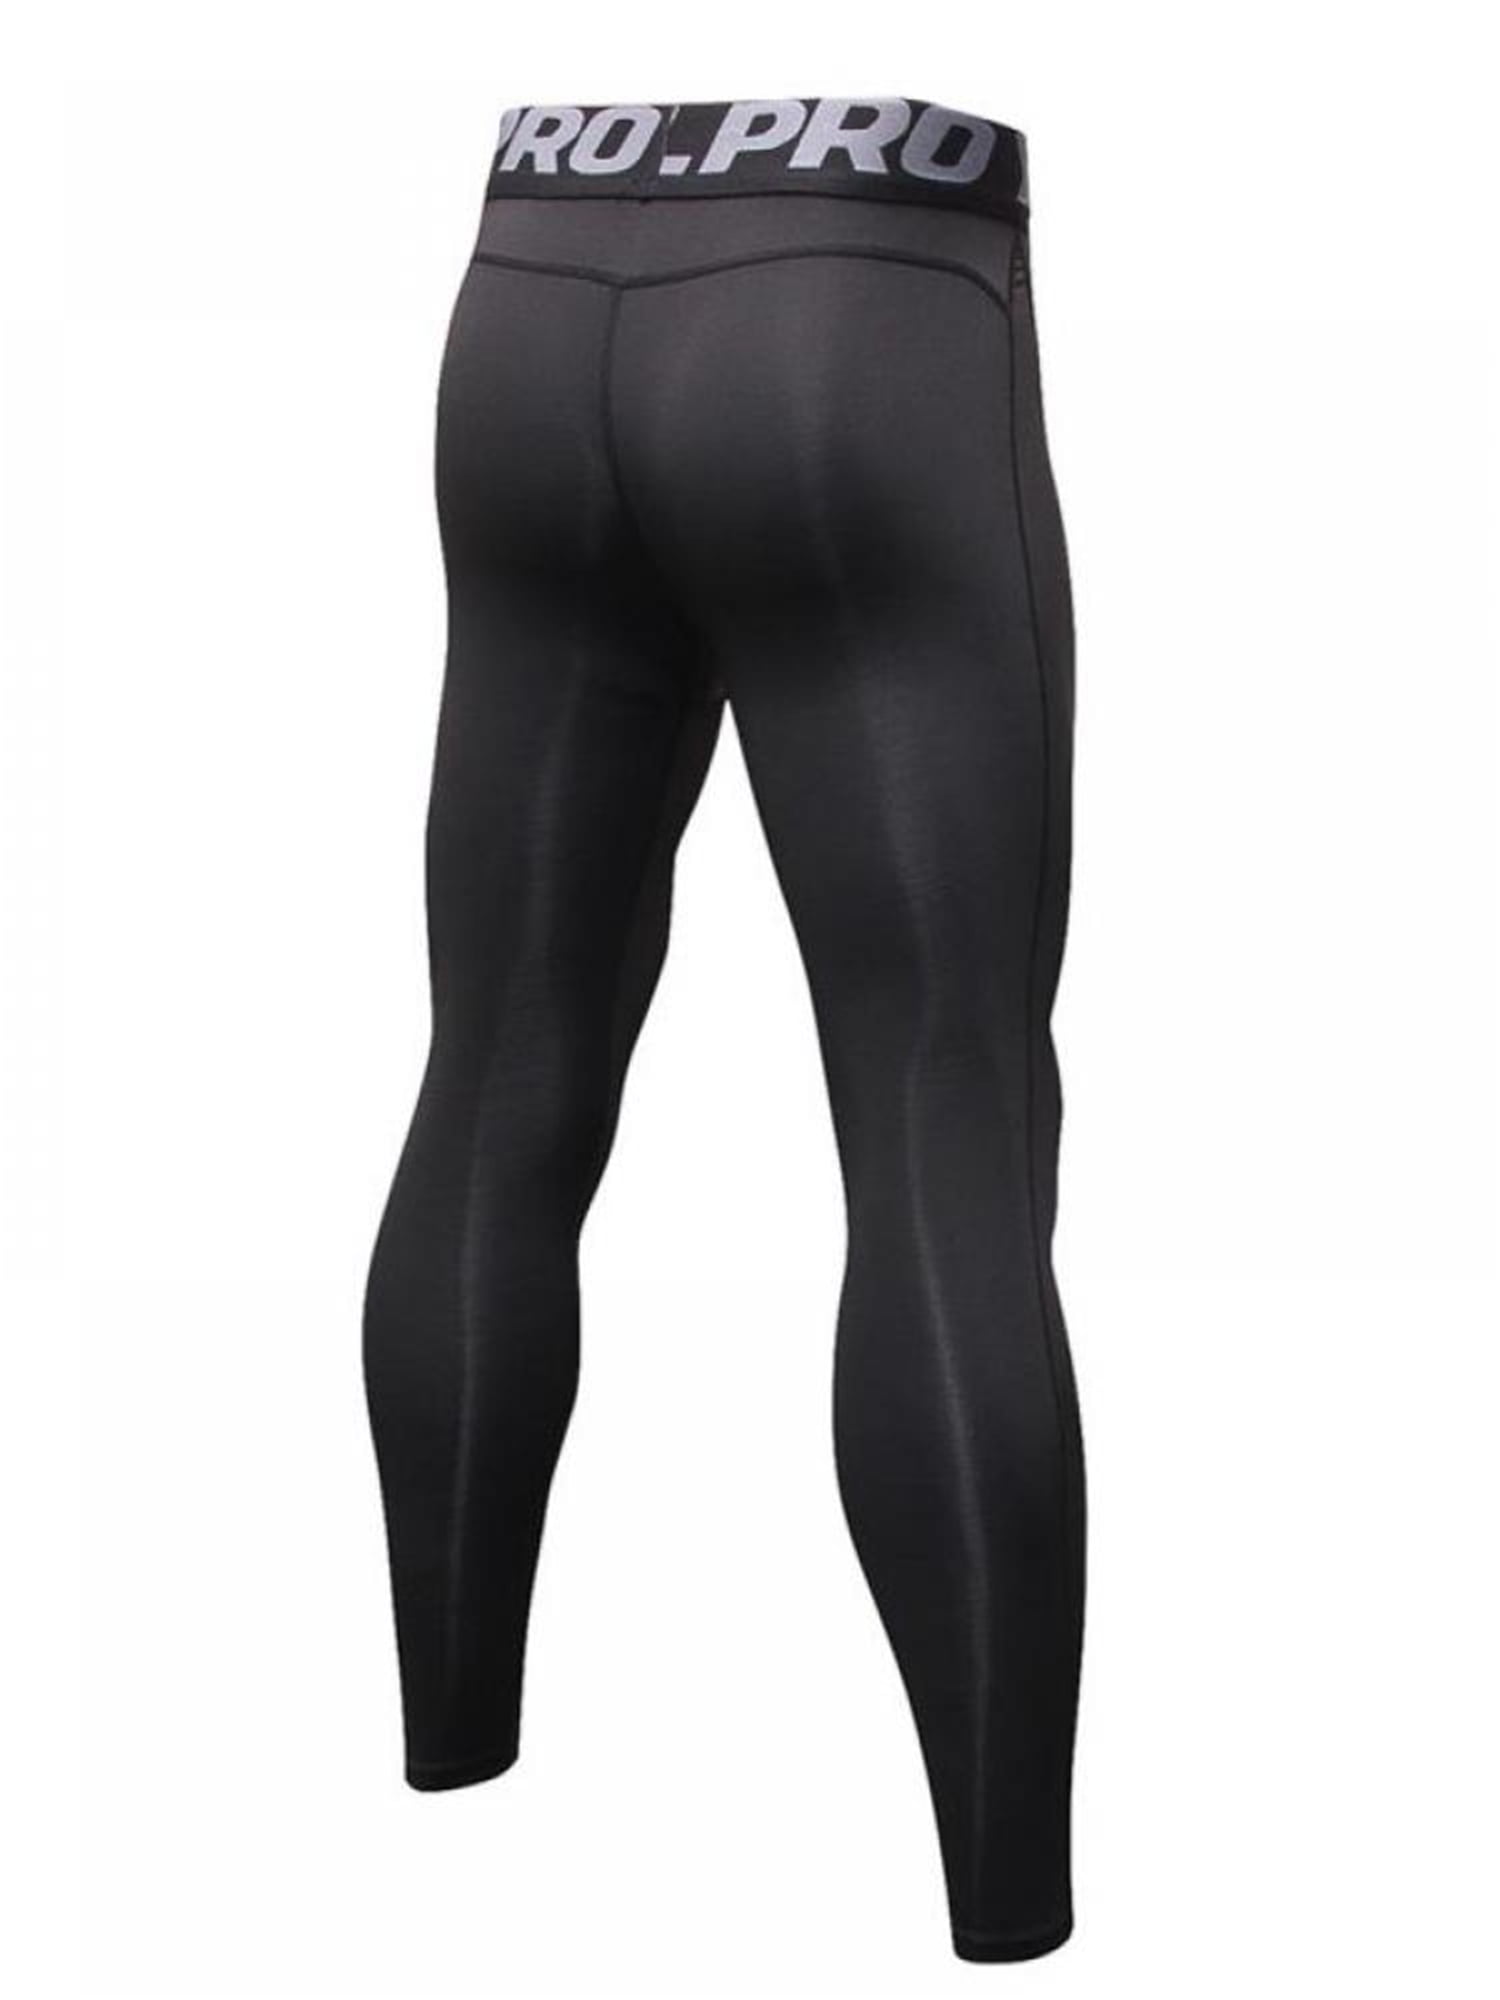 Details about   Men's Compression Fitness Pants T-shirt Top Cool Dry Running Tights Leggings 